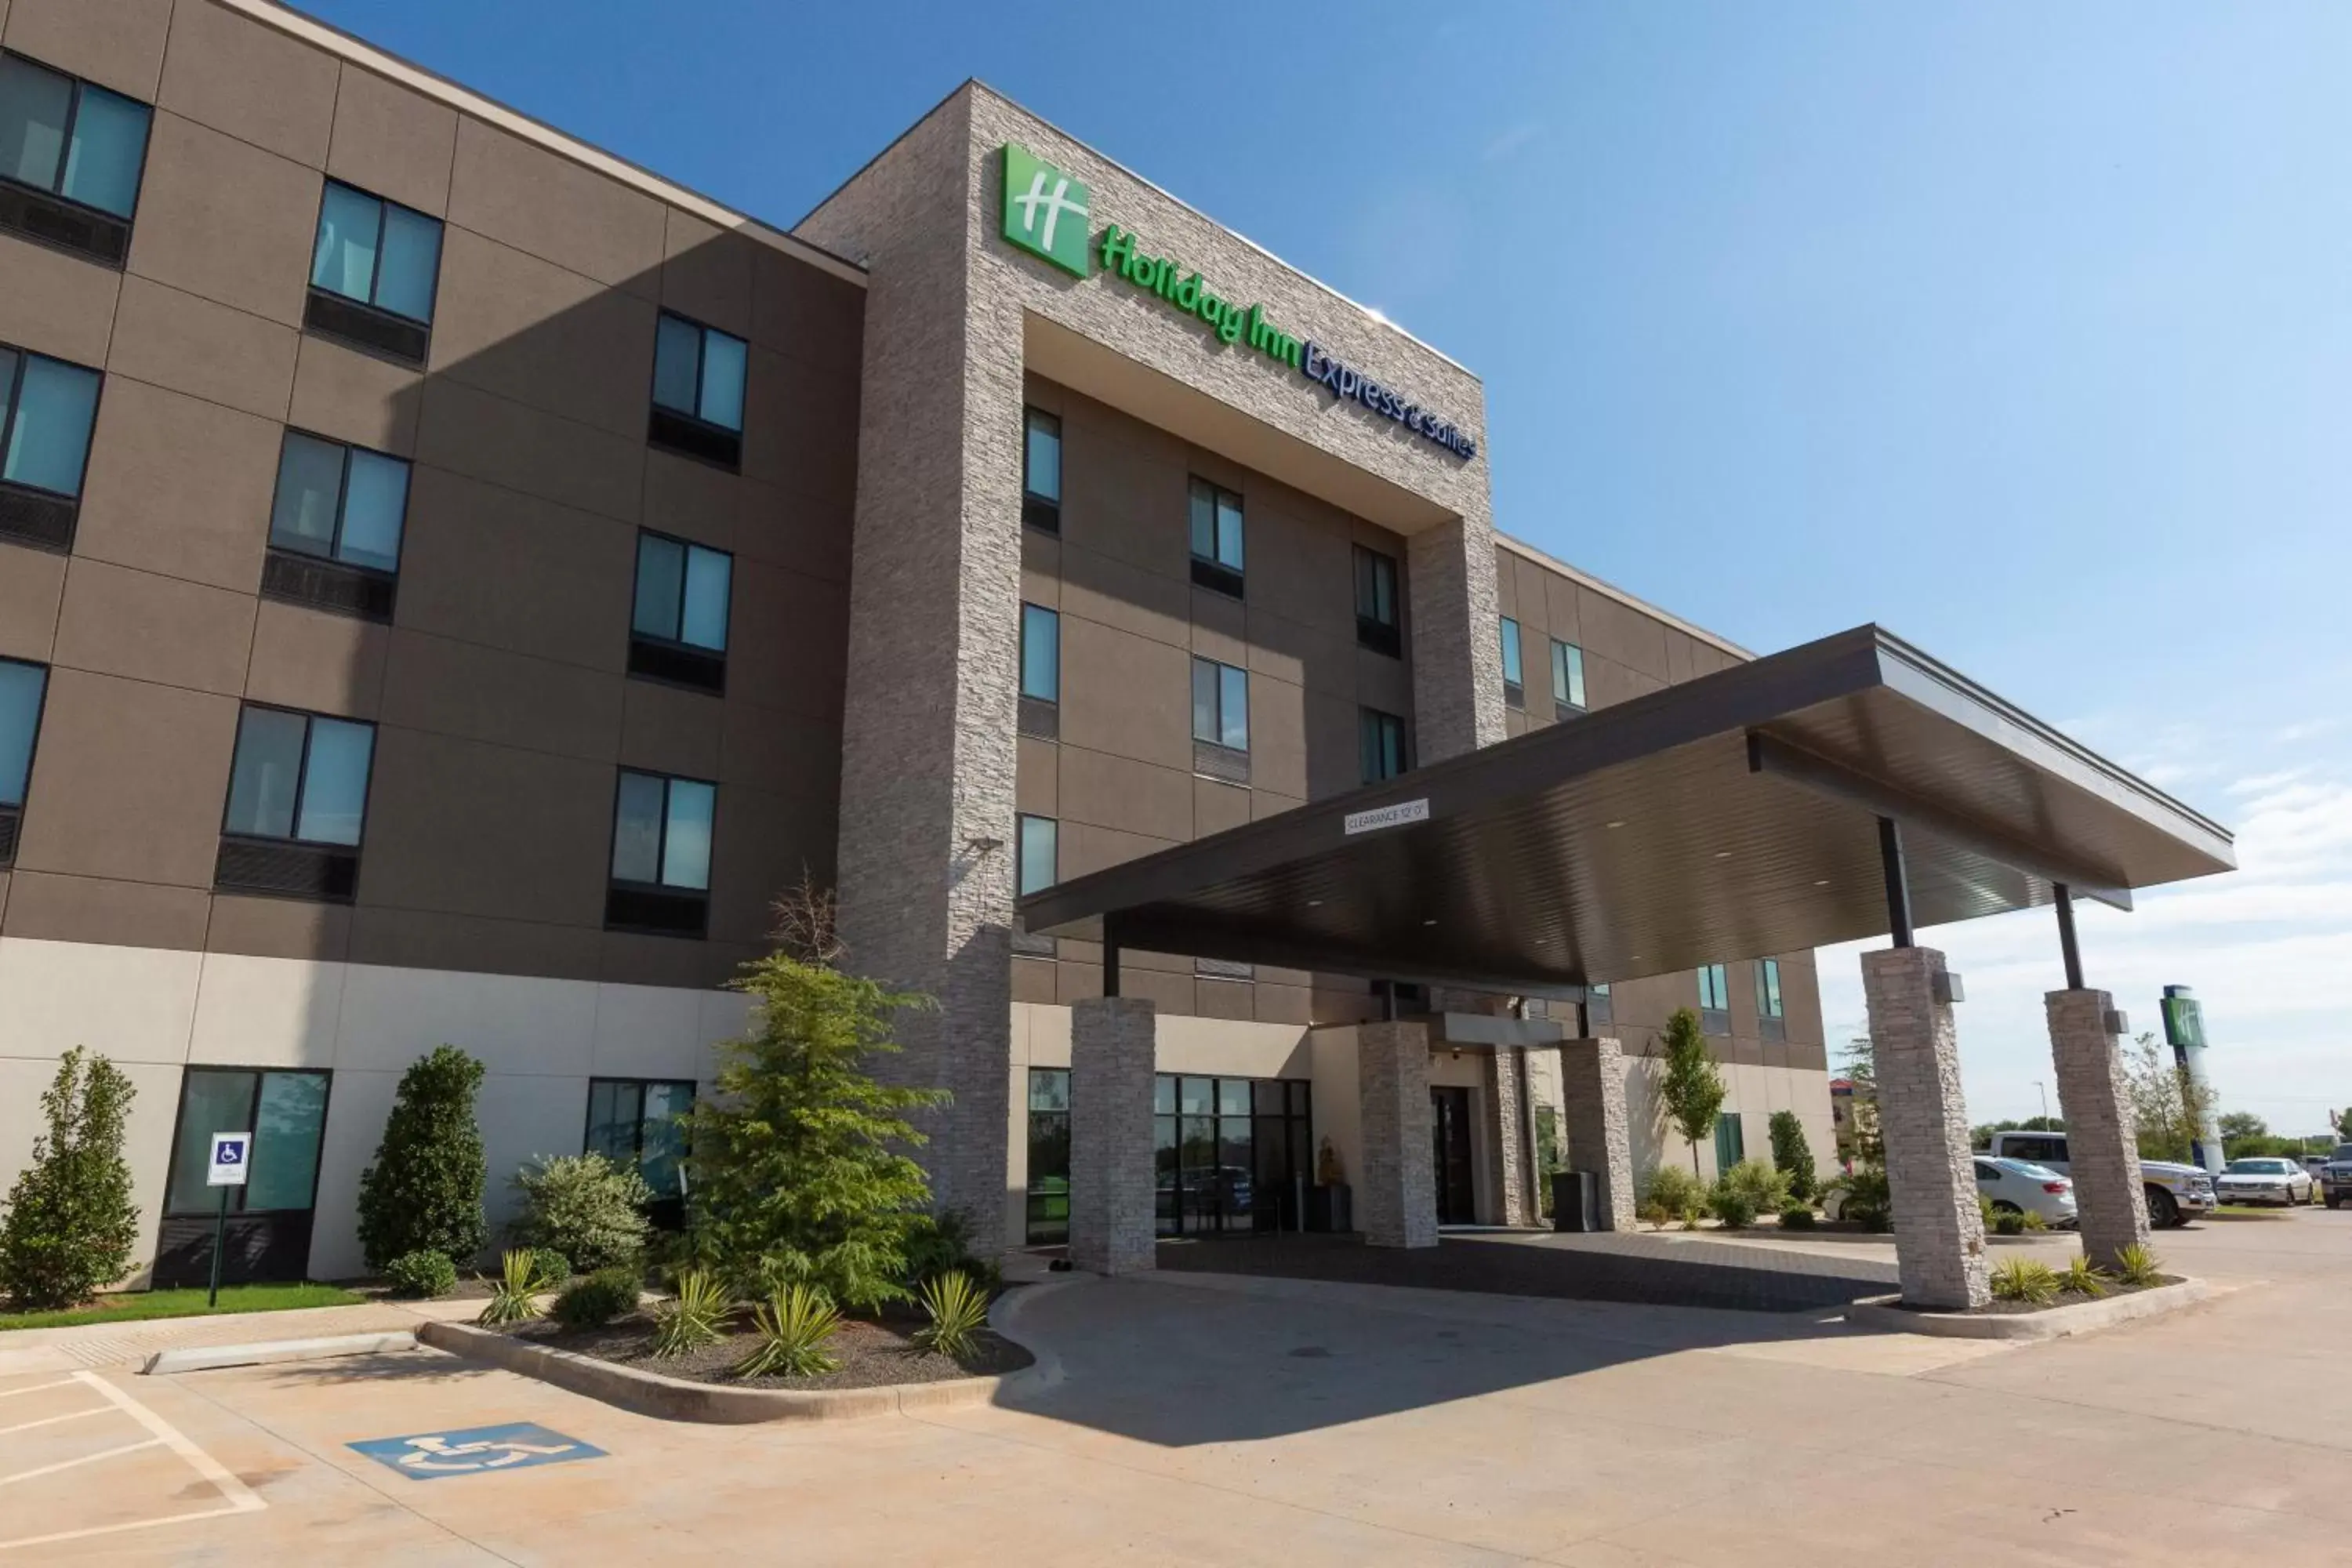 Property building in Holiday Inn Express & Suites - Kingfisher, an IHG Hotel